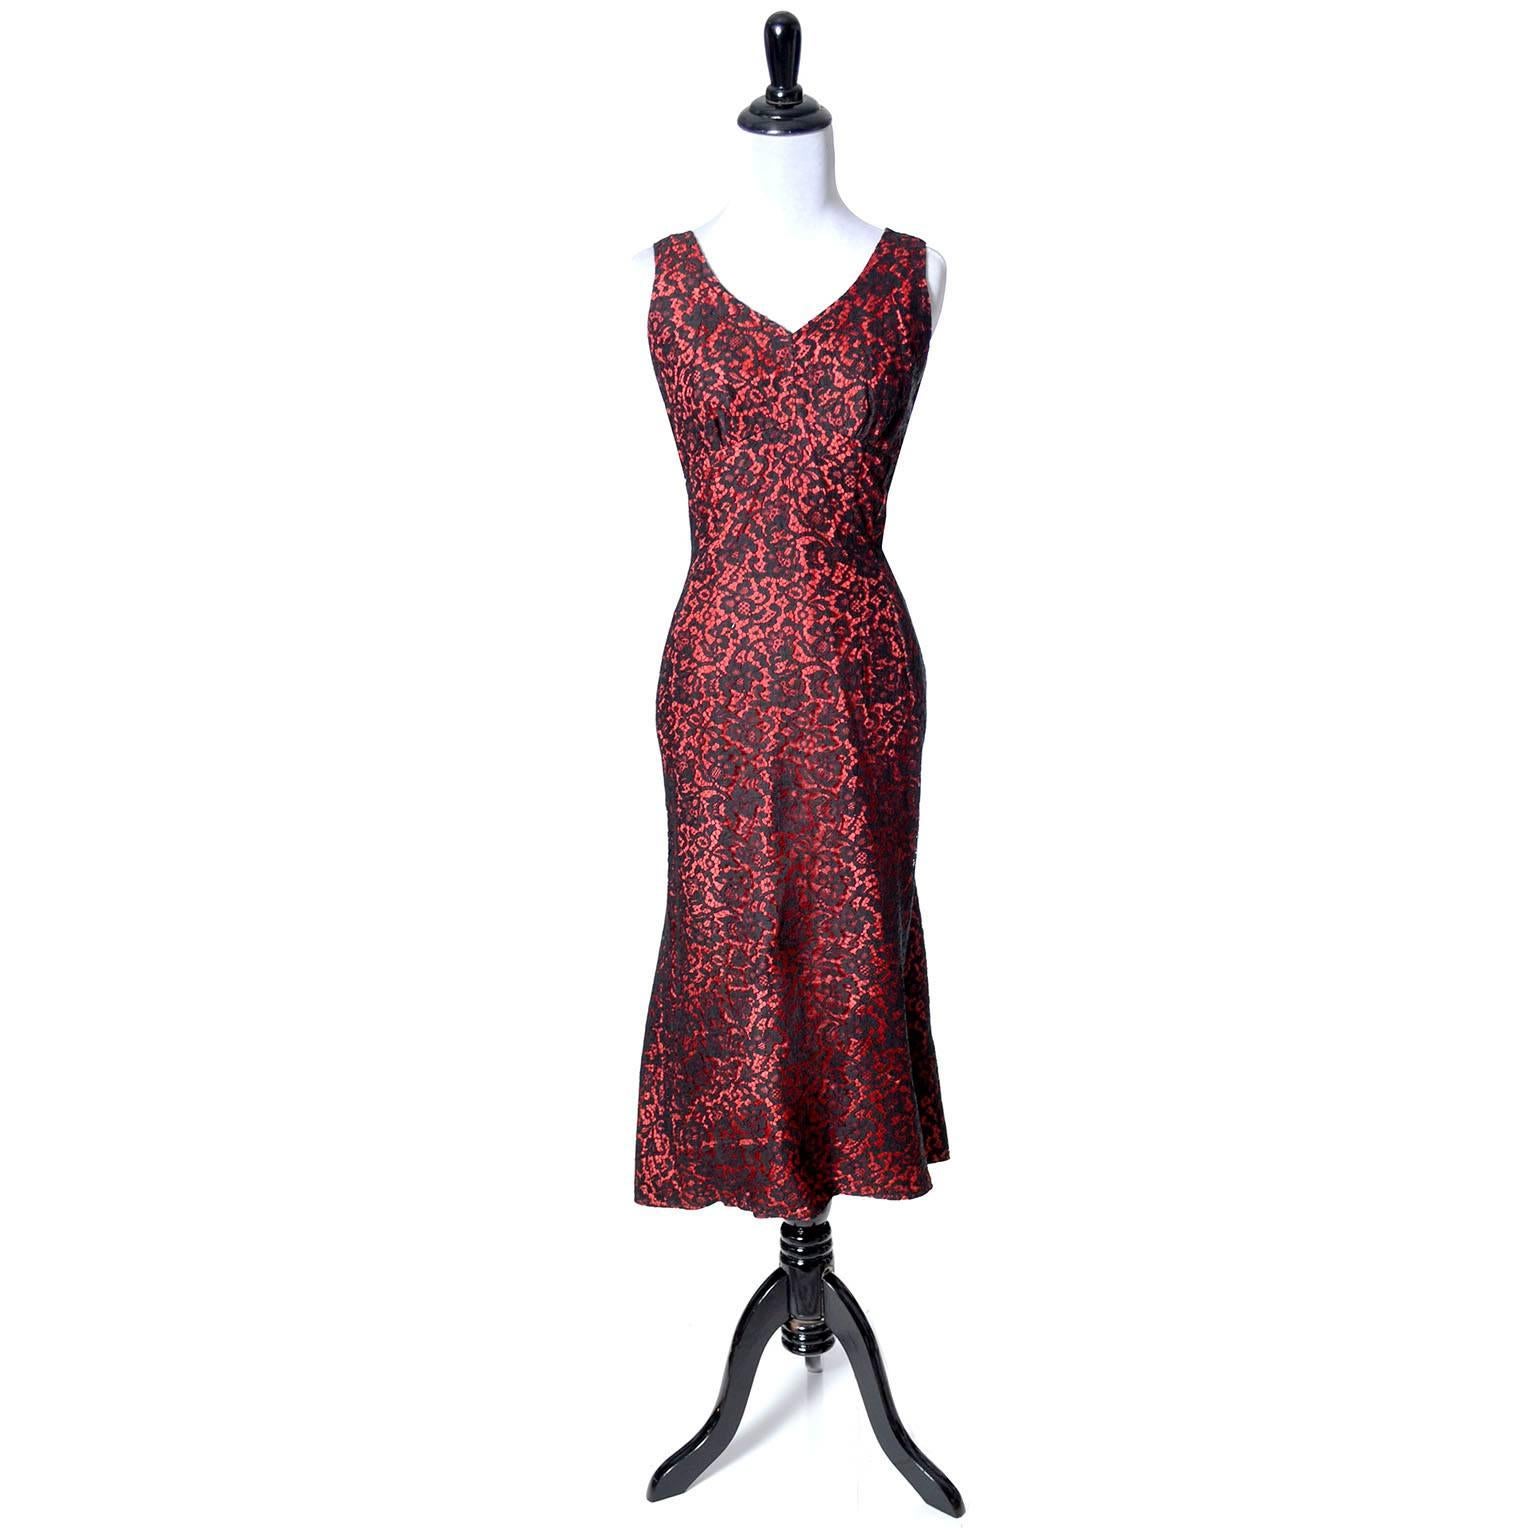 This is a fab vintage 1950s designer dress from Emma Domb. This beautiful early 50s dress is sleeveless, with a fun skirt that looks almost like a fish tail hem in the back. The dress is red taffeta with black lace overlay and opens with a 13” side